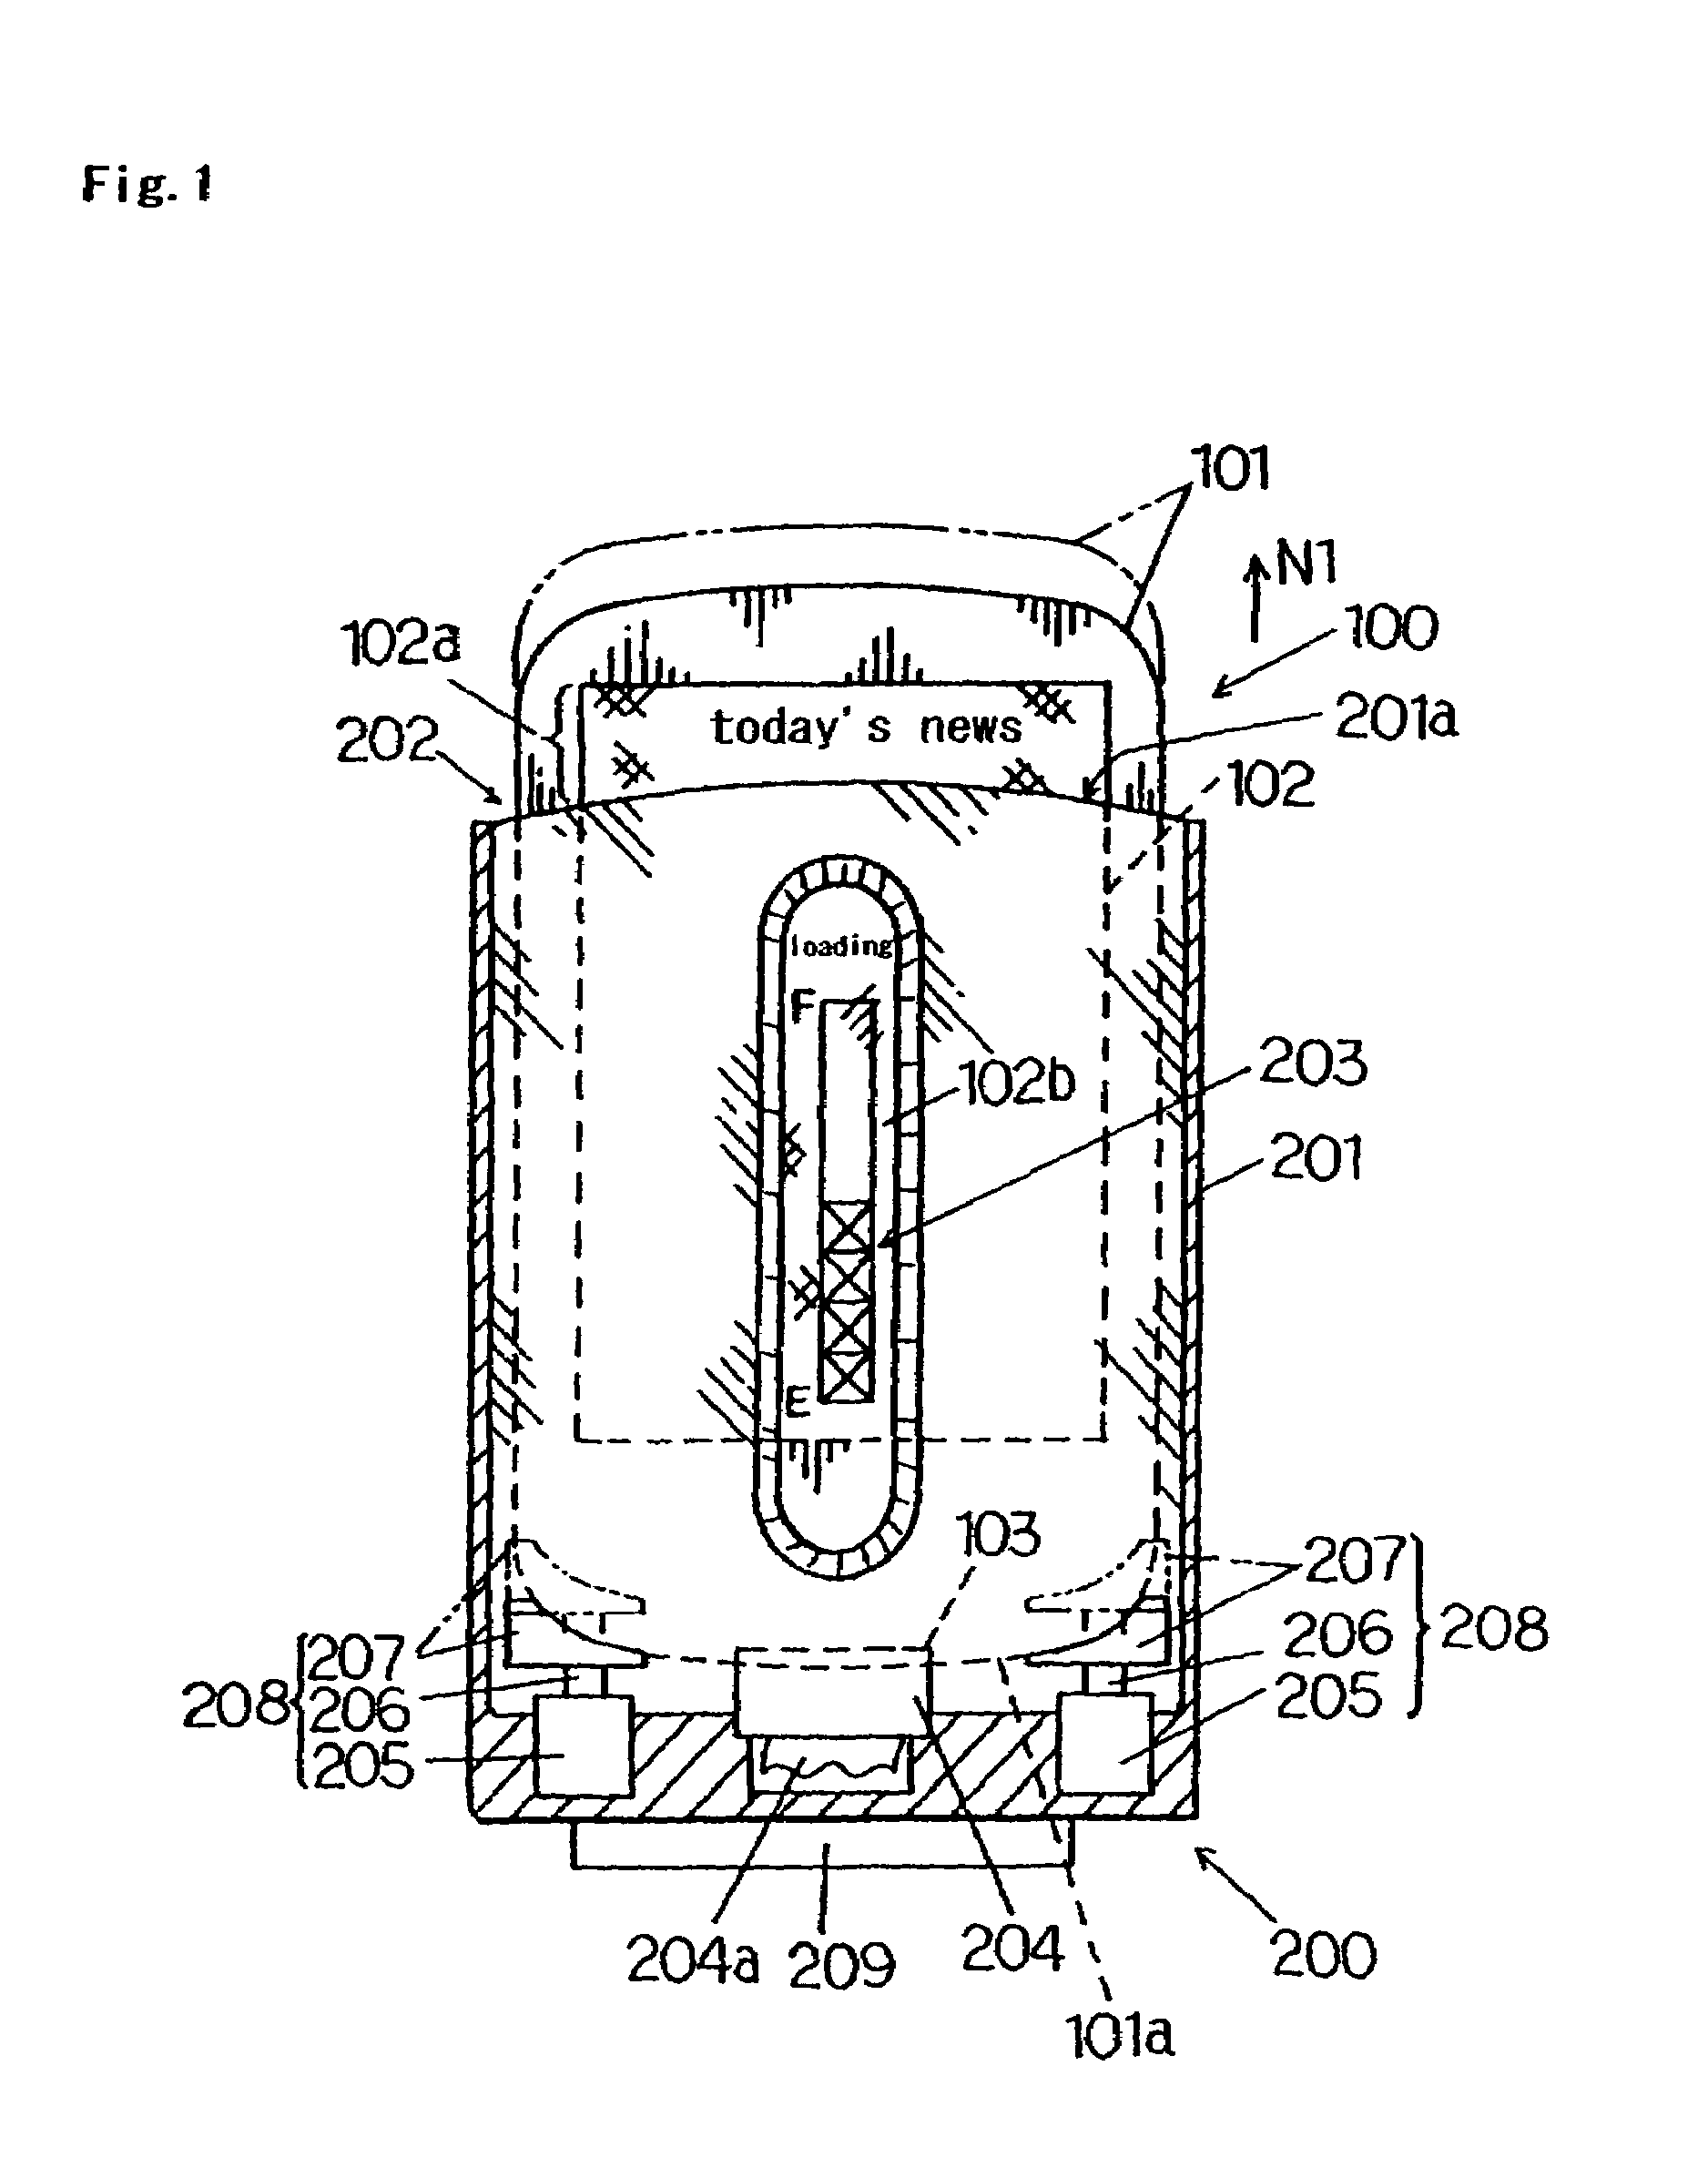 Mounting device for mobile information terminal, and mobile information terminal